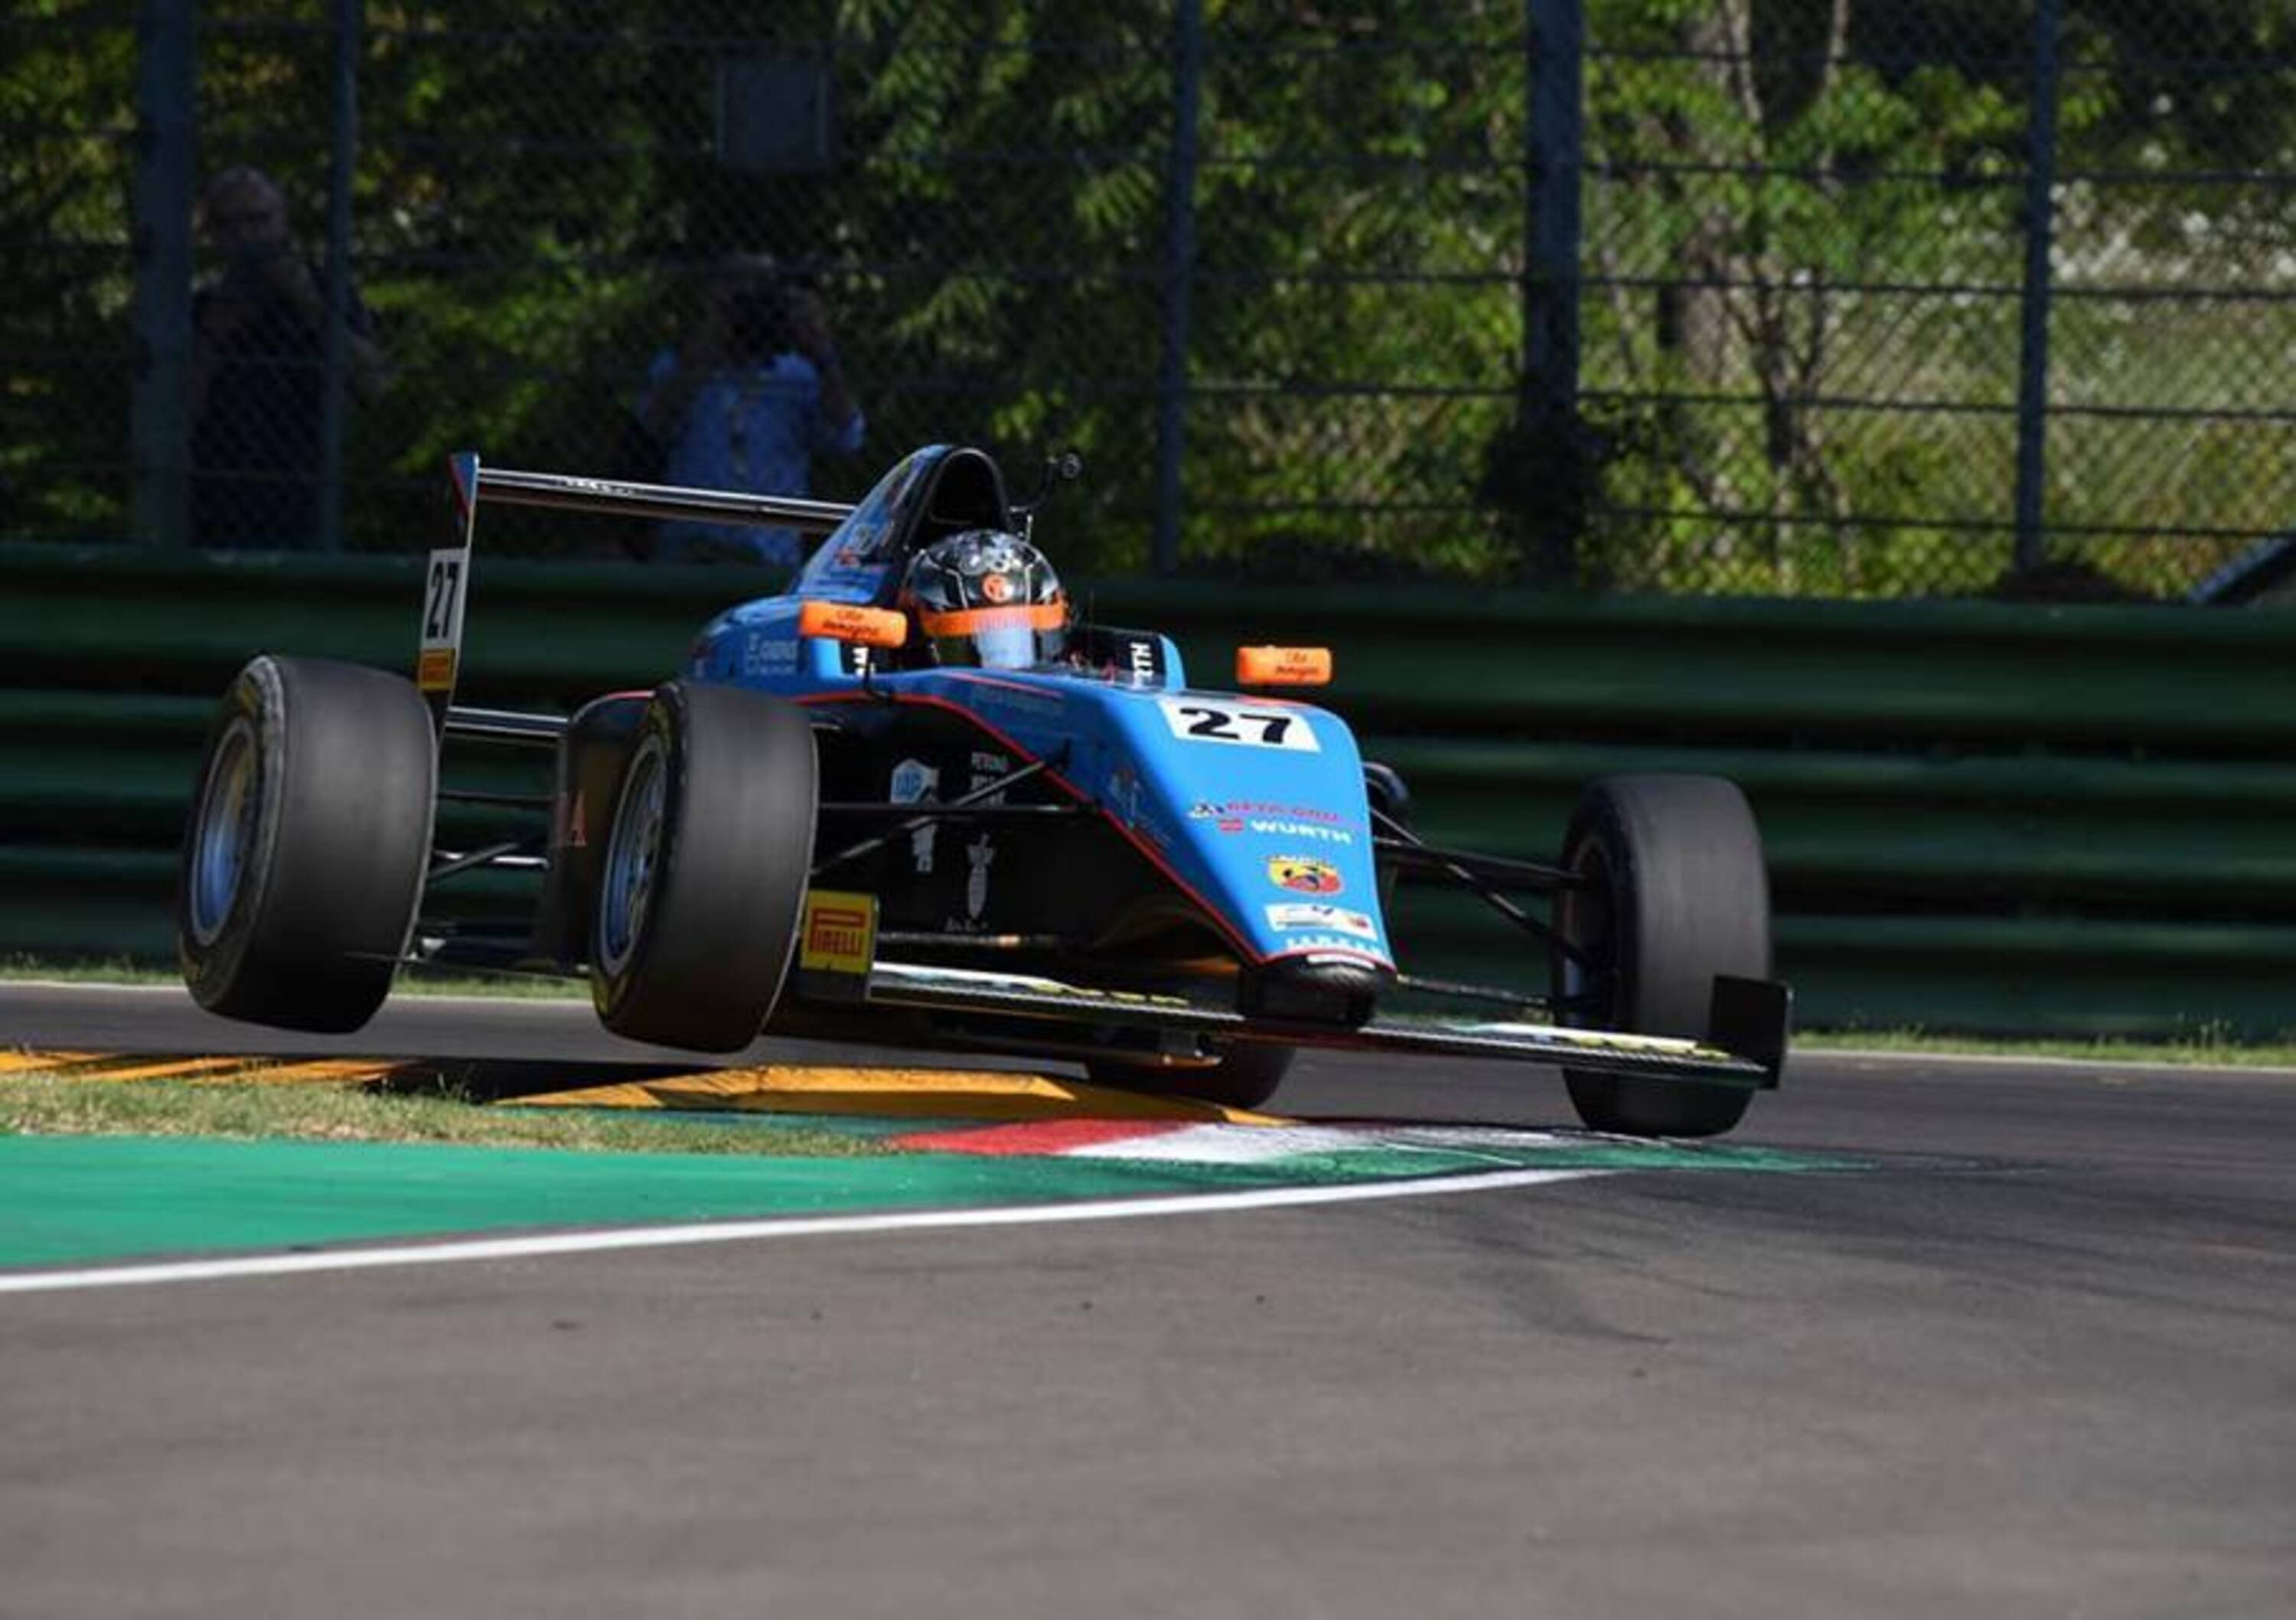 ACI Racing Weekend: a Vallelunga si entra gratis il 15-16 settembre